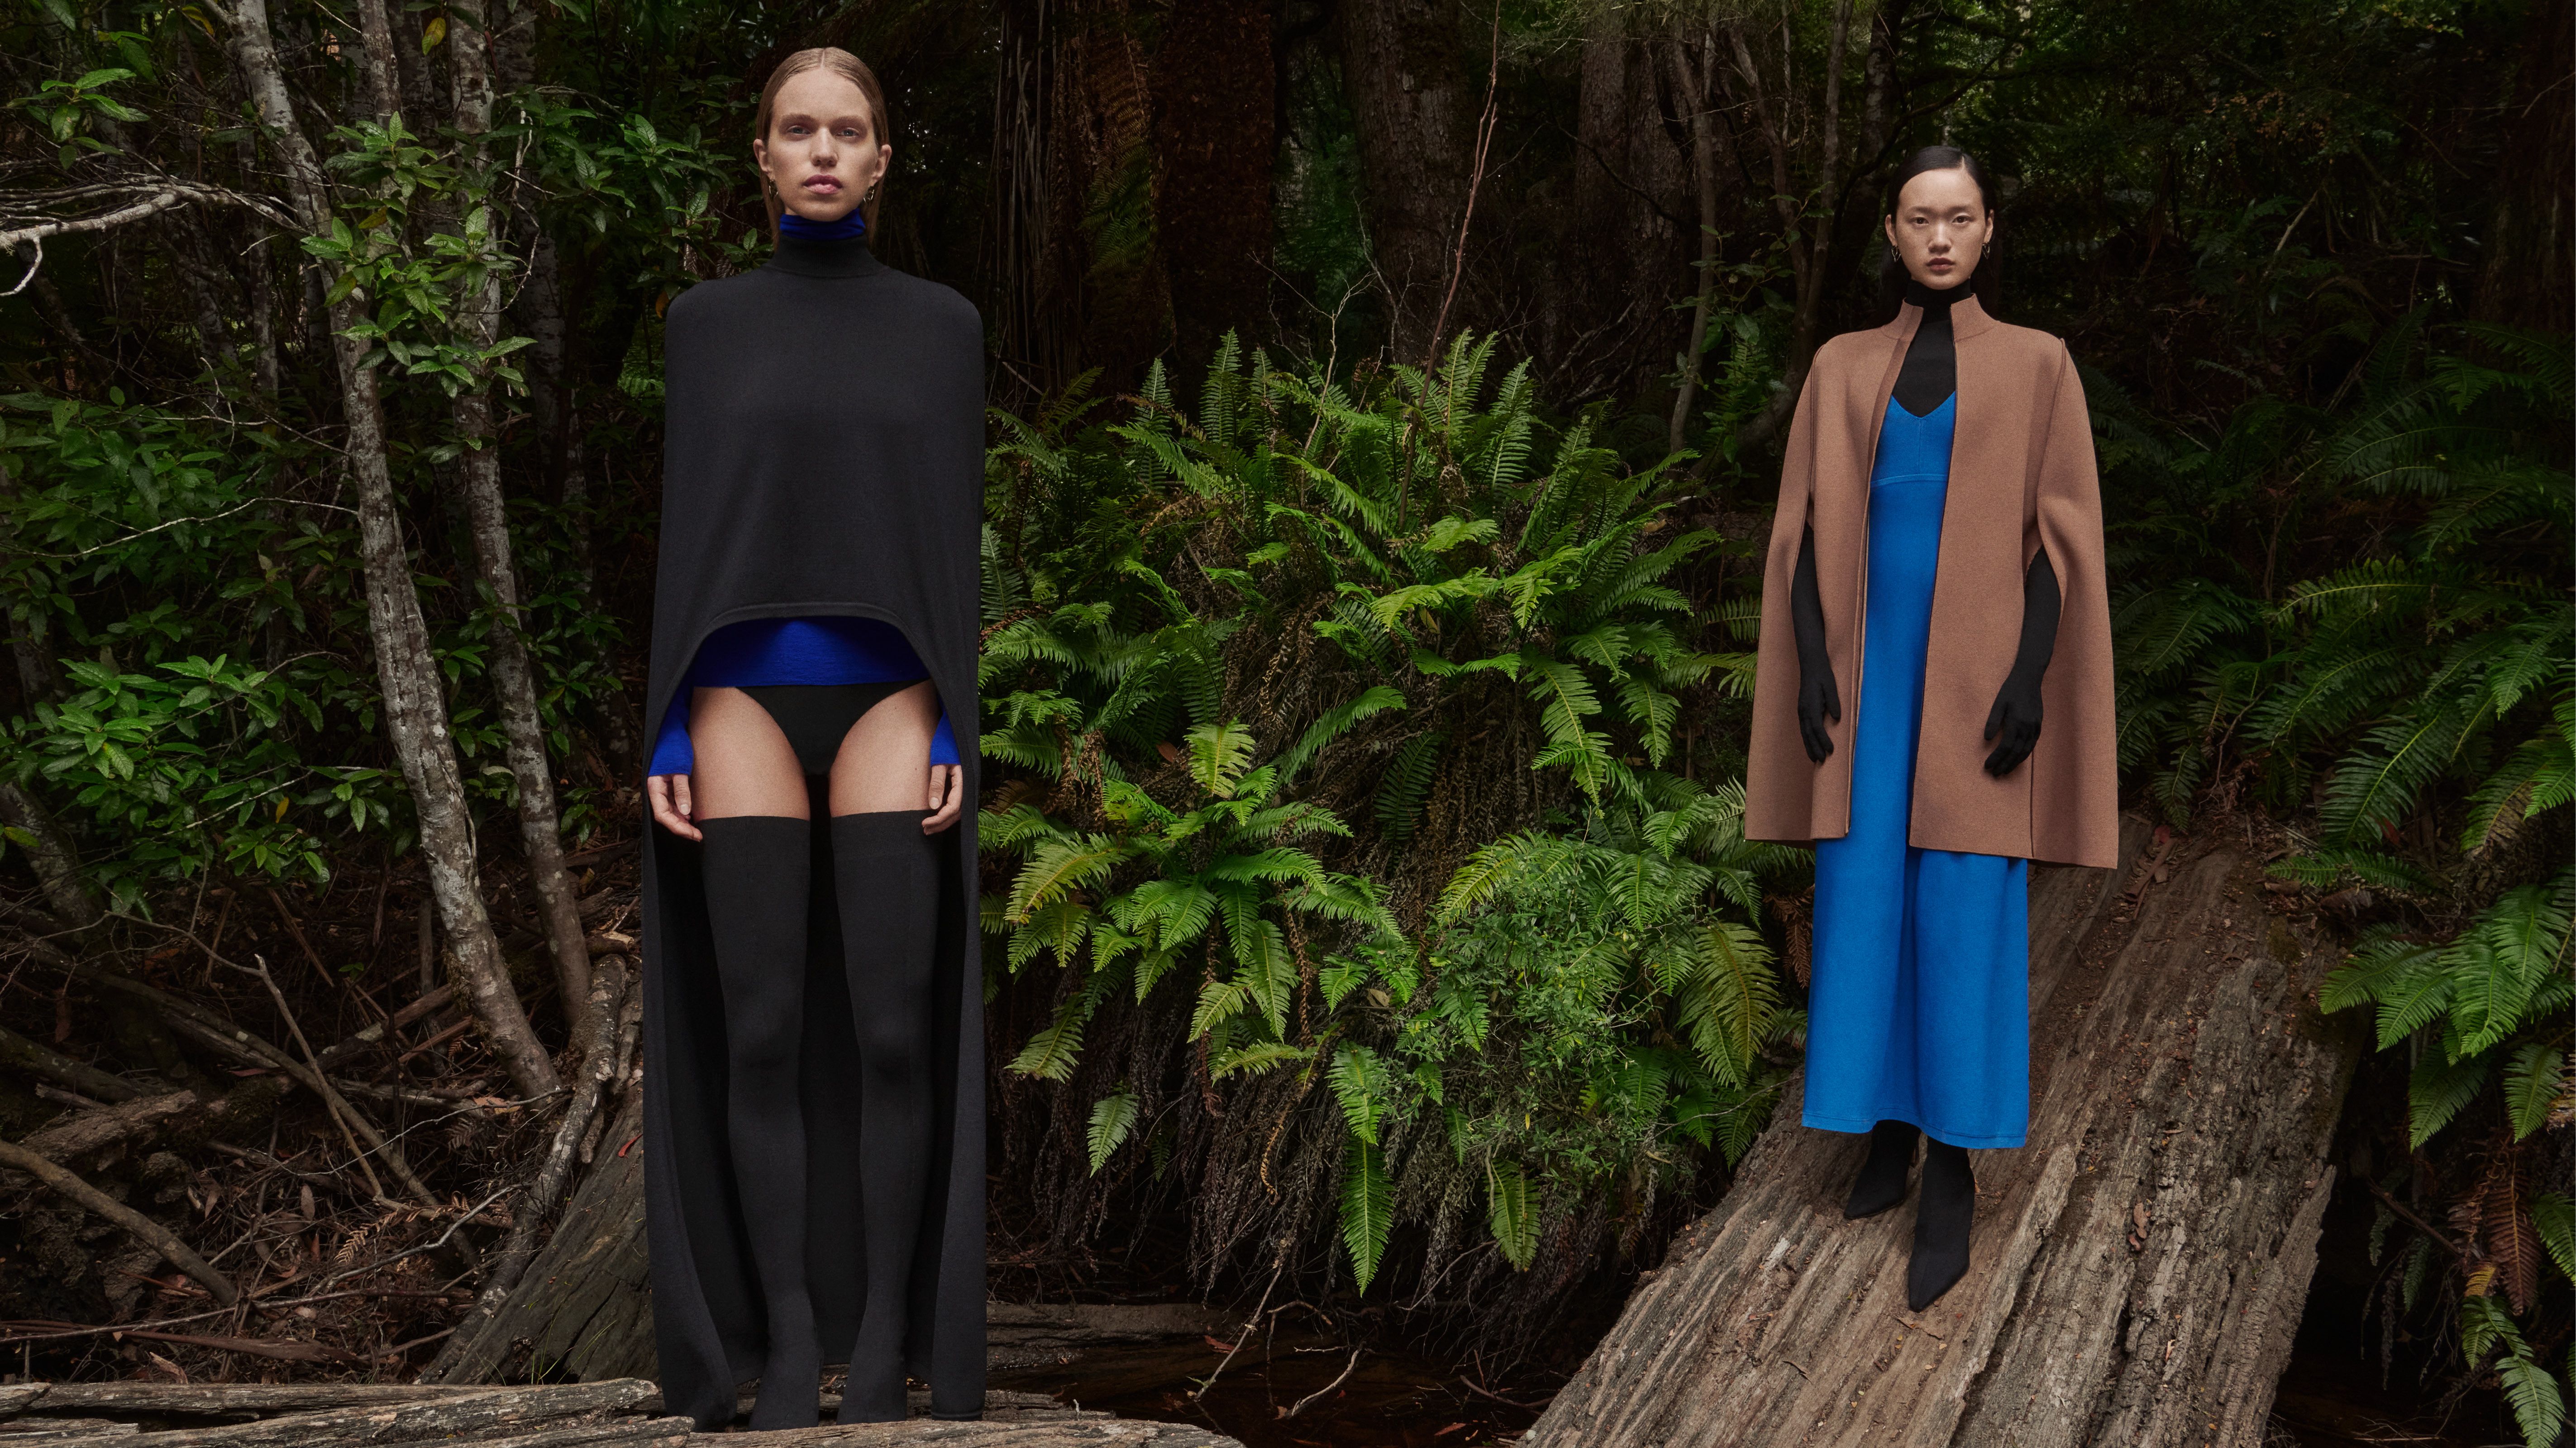 Sabine Glud and Venus He standing in the forest wearing Crepe Knit clothing in shades of black, camel and cobalt